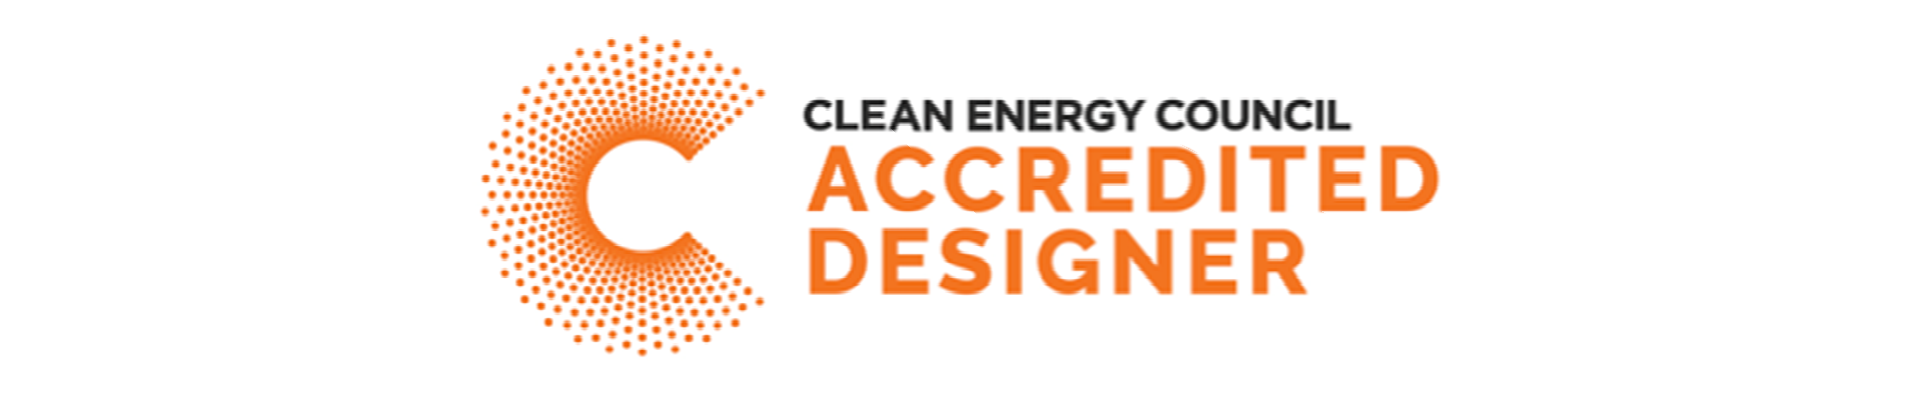 The logo for the clean energy council accredited designer